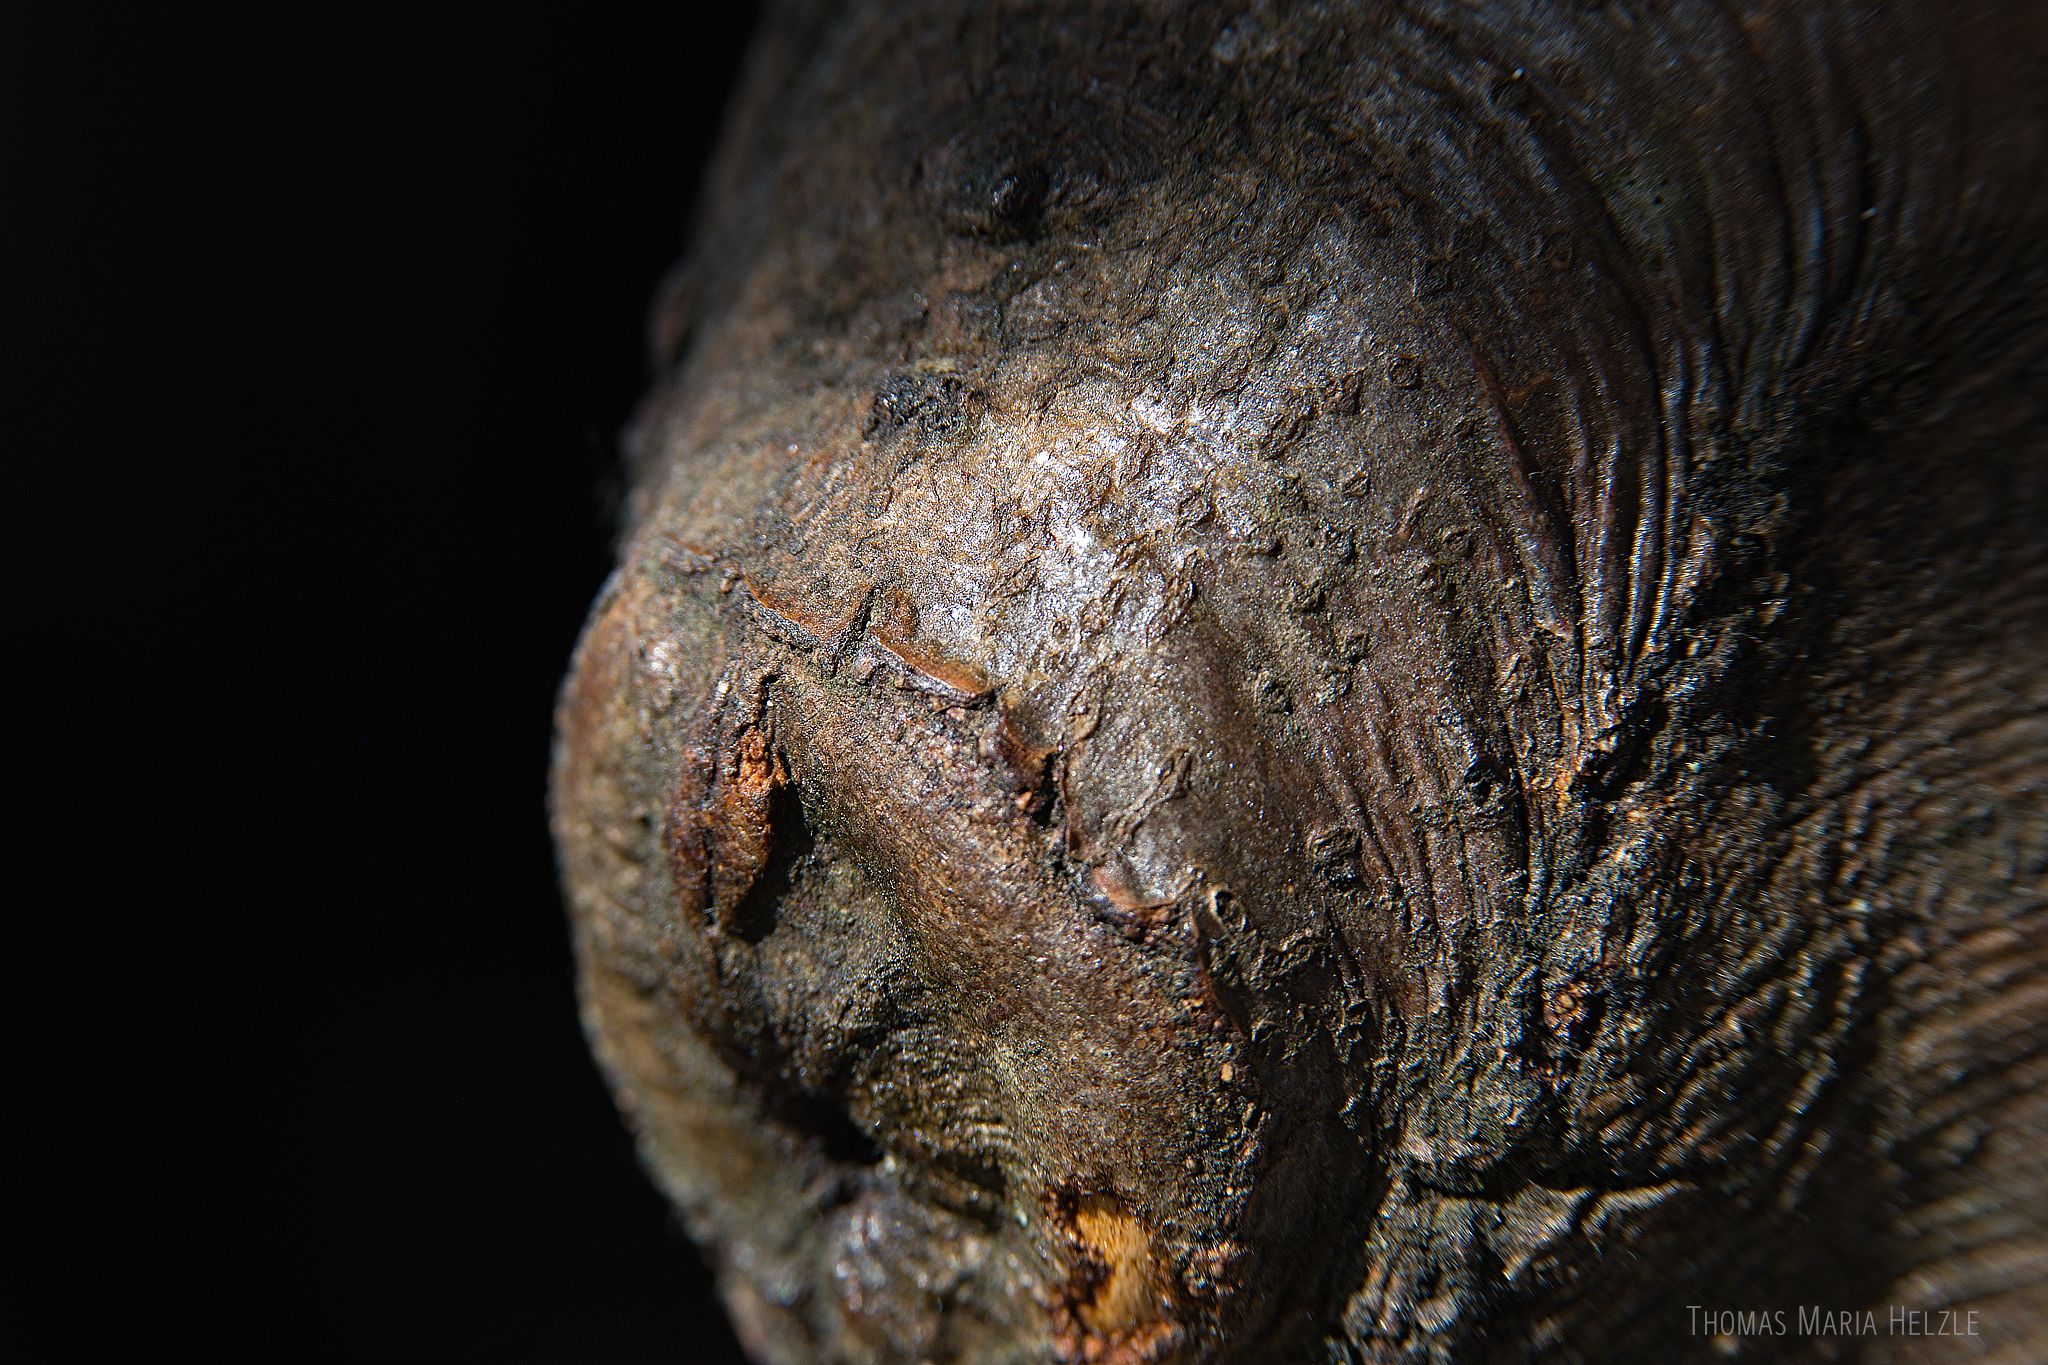 Close up of one of the 'arm stumps', where a branch was cut and bark grew over it, like scar tissue. The bark around it is folded and wrinkled.